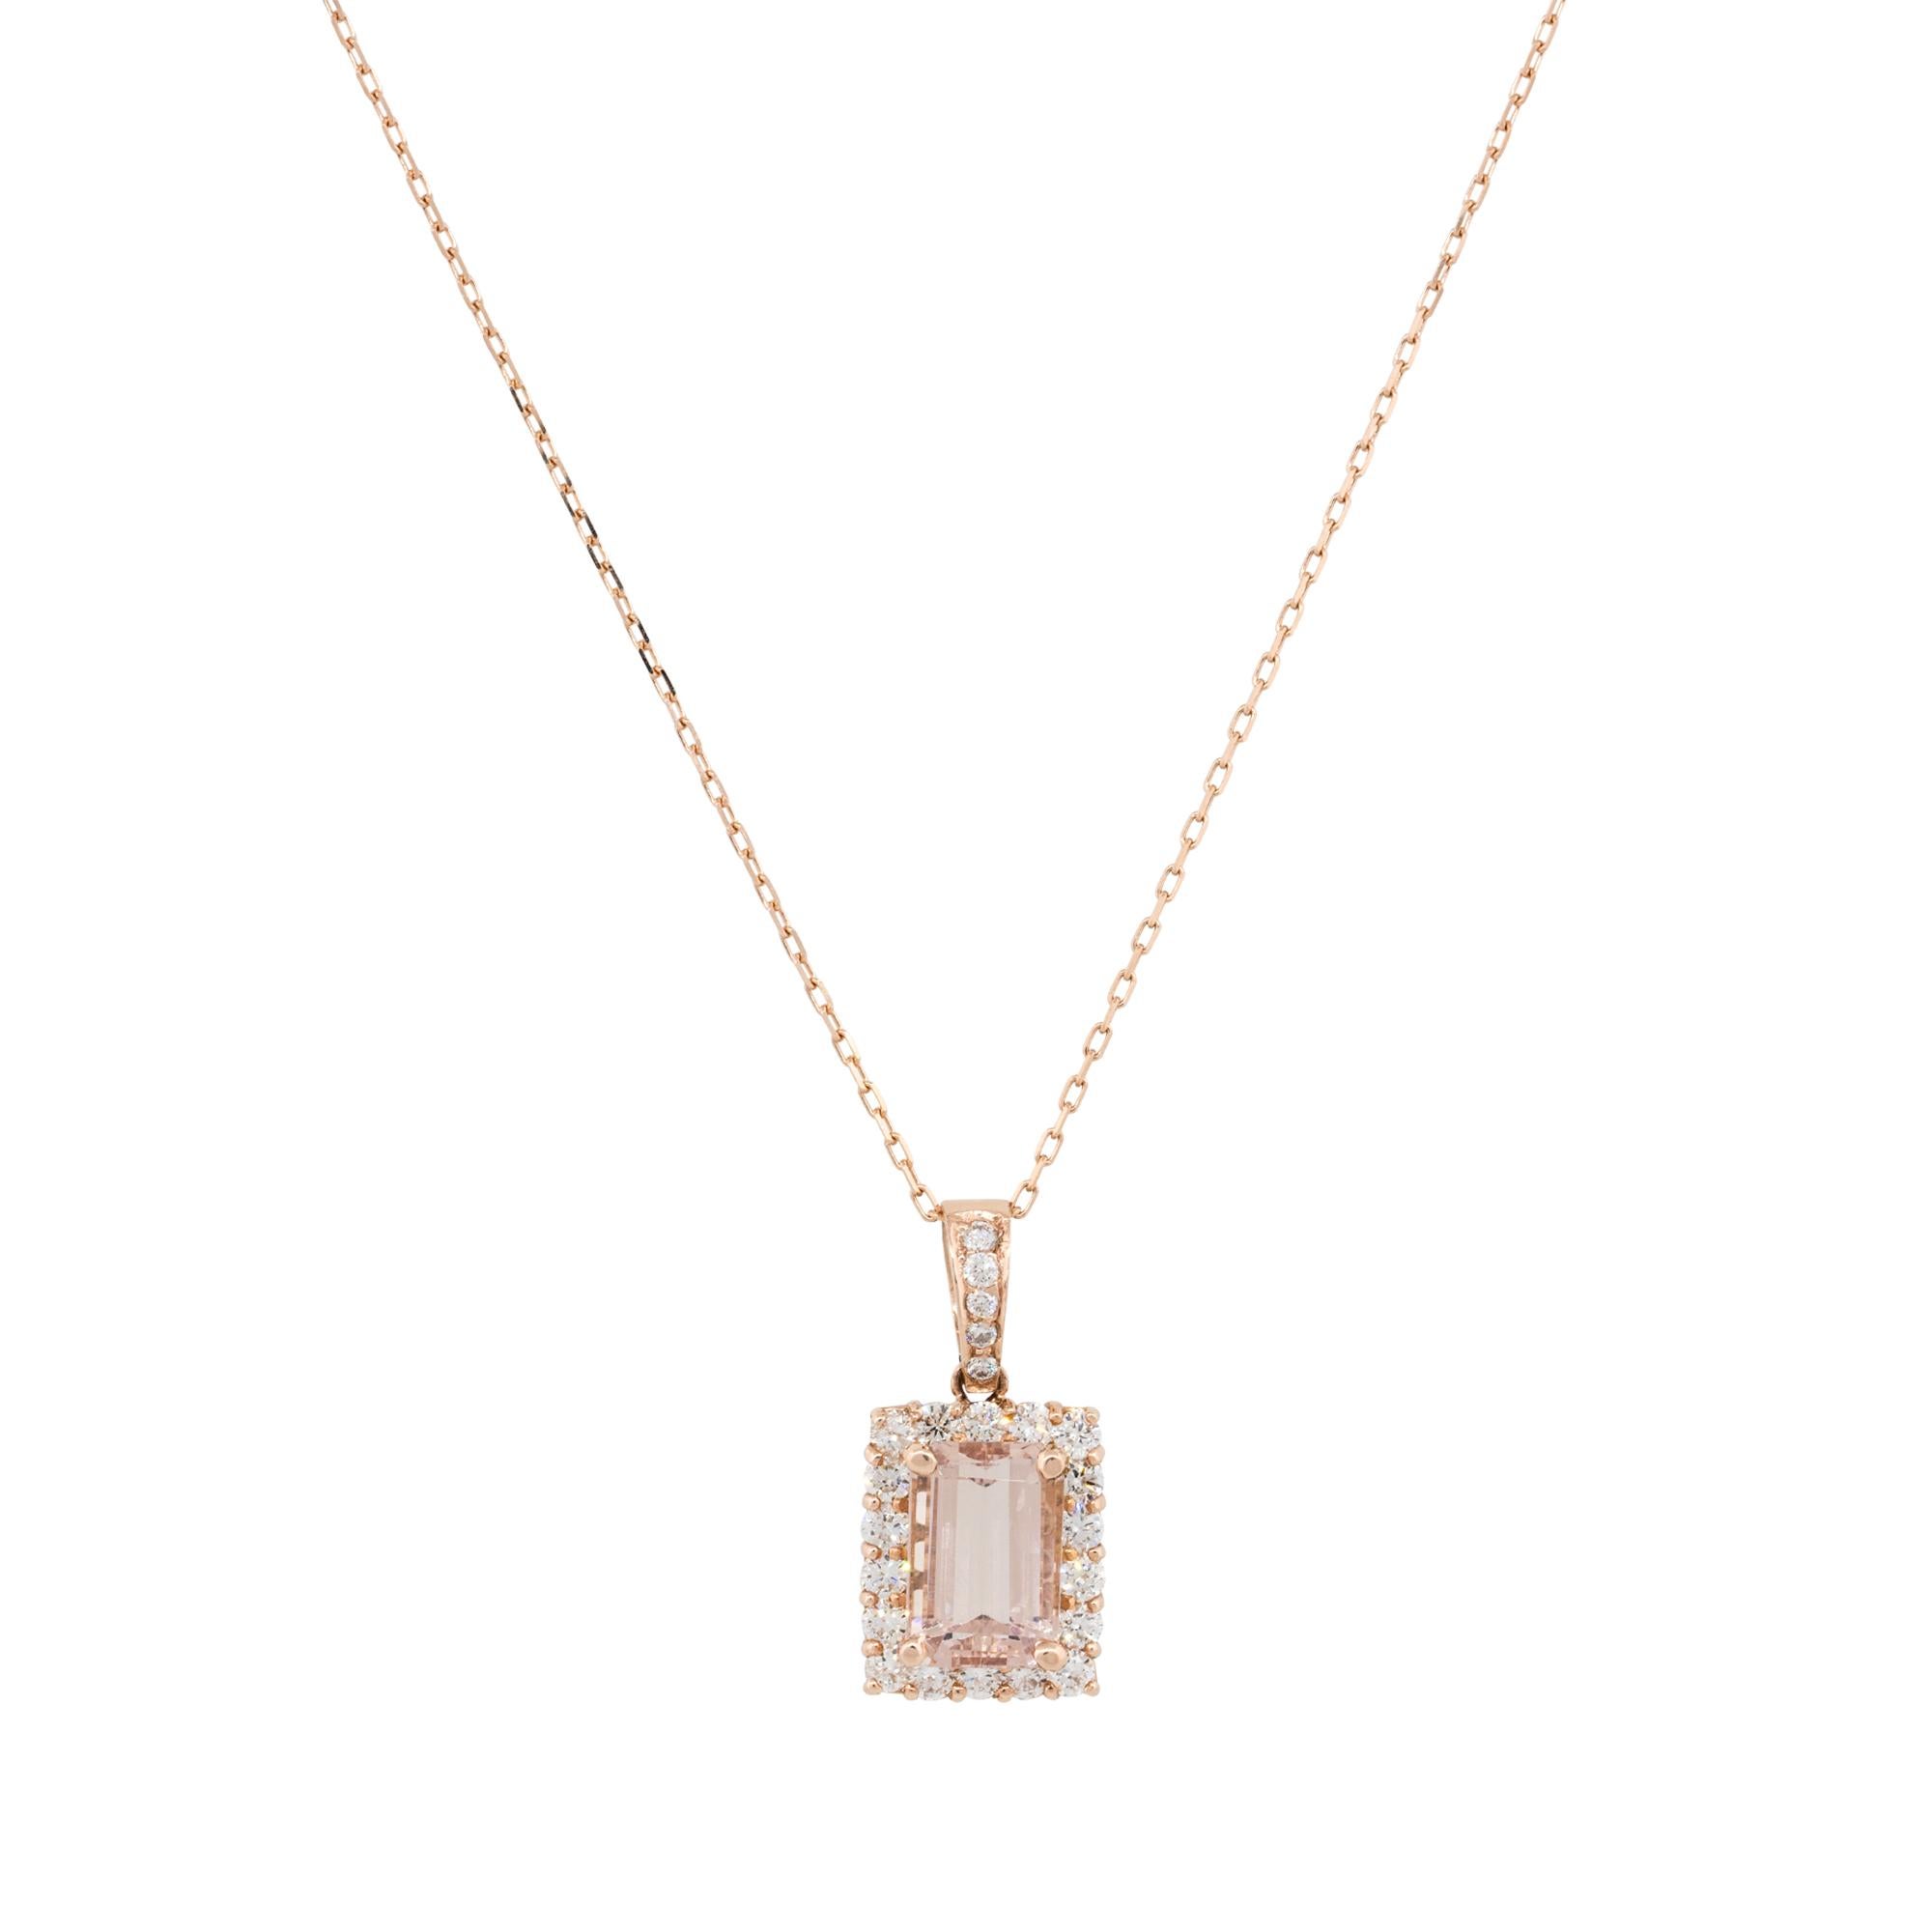 Material: 14k Rose Gold
Diamond Details: Approx. 1.09ctw of round cut Diamonds. Diamonds are F in color and VS in clarity
Gemstone Details: Approx. 3.28ctw emerald shape Morganite gemstone
Clasps: Lobster clasp
Total Weight: 6.2g (4.0dwt)
Pendant